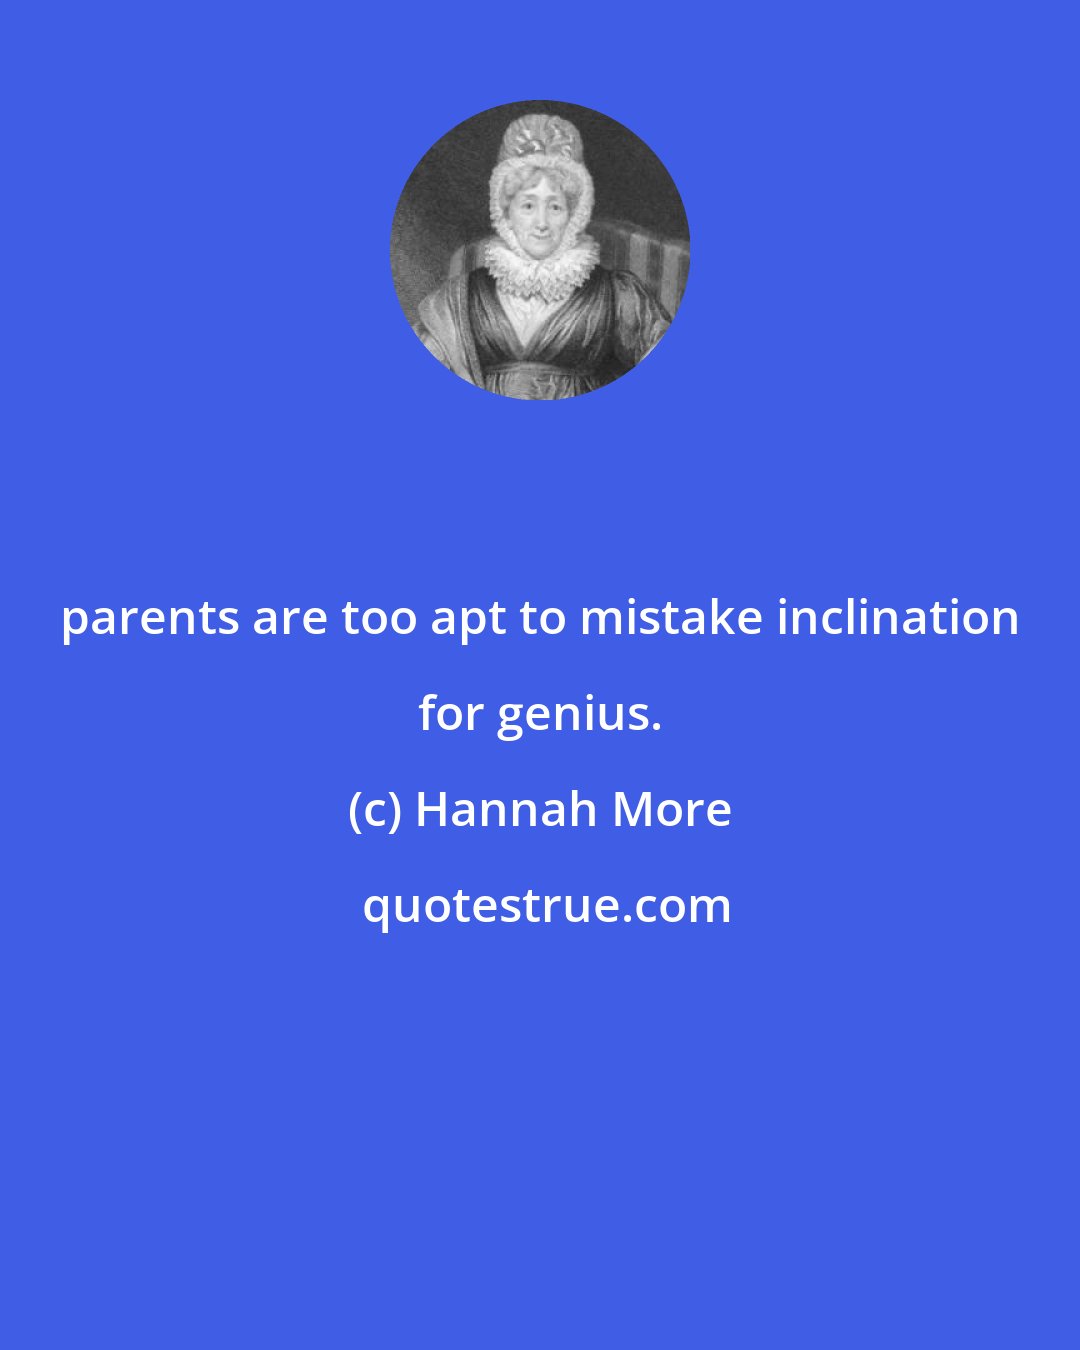 Hannah More: parents are too apt to mistake inclination for genius.